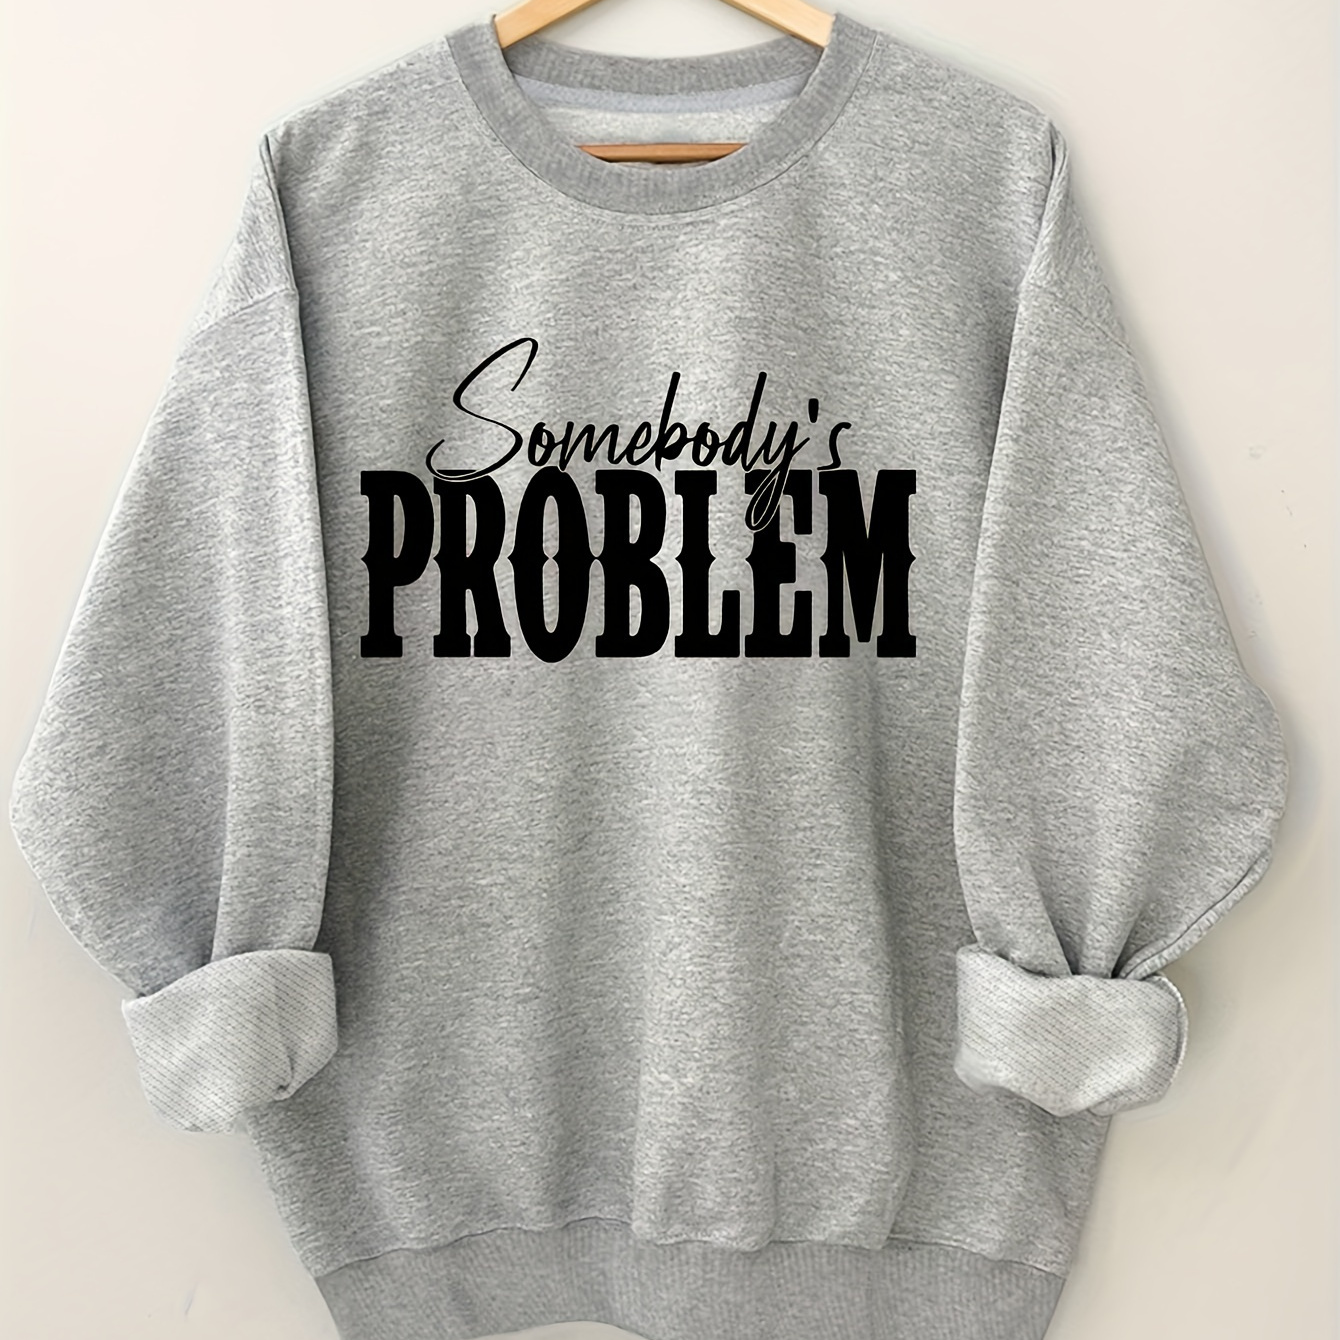 

Somebody's Problem Print Pullover Sweatshirt, Casual Long Sleeve Crew Neck Sweatshirt For Spring & Fall, Women's Clothing